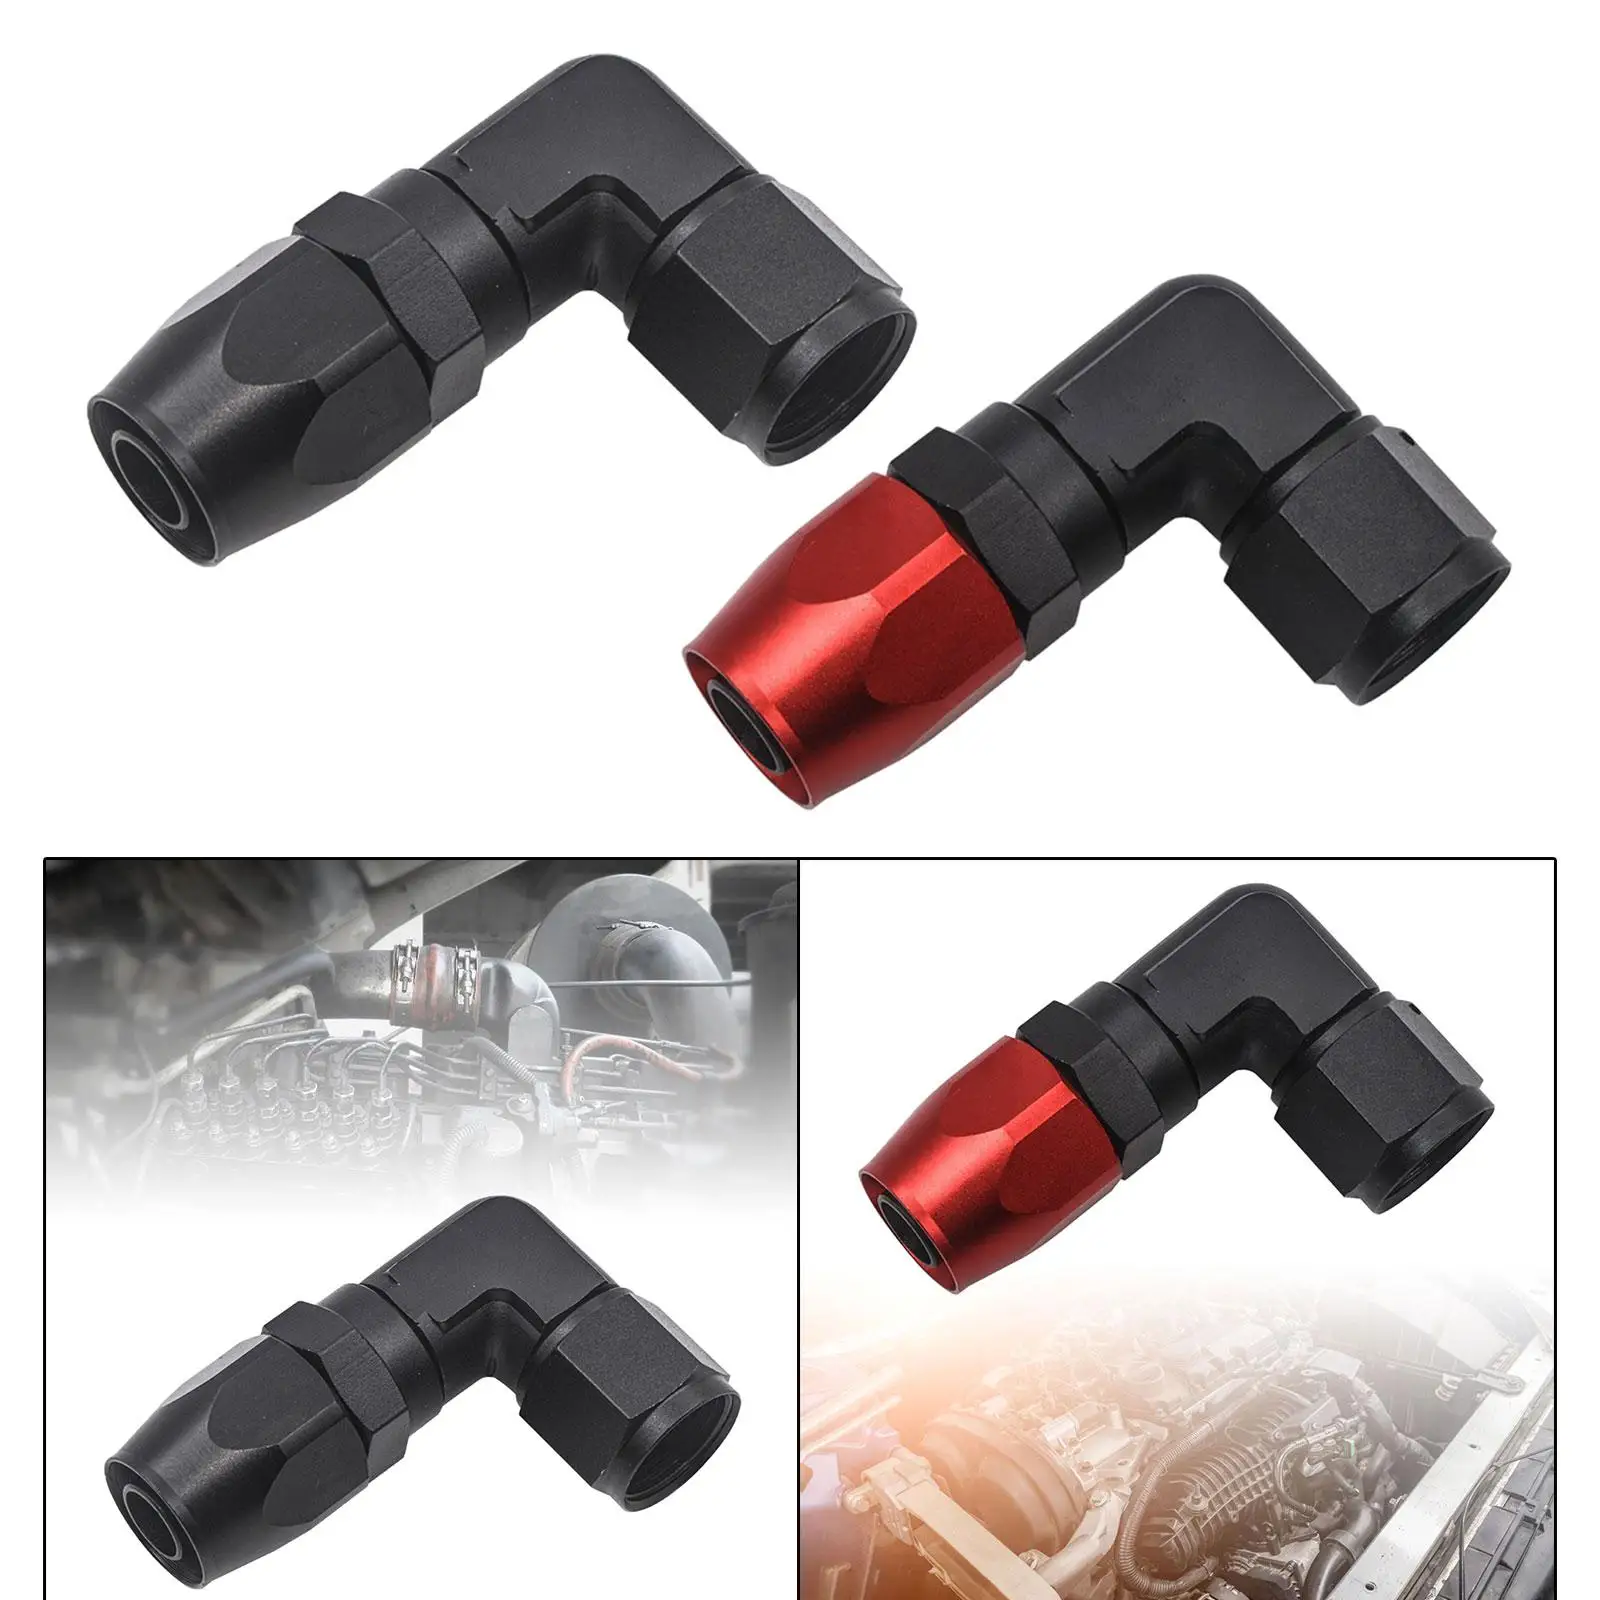 Fuel Fitting Connector Reusable AN10 Thread Connector for Automotive Replacement Fuel System Fittings Oil Fuel Hose Line